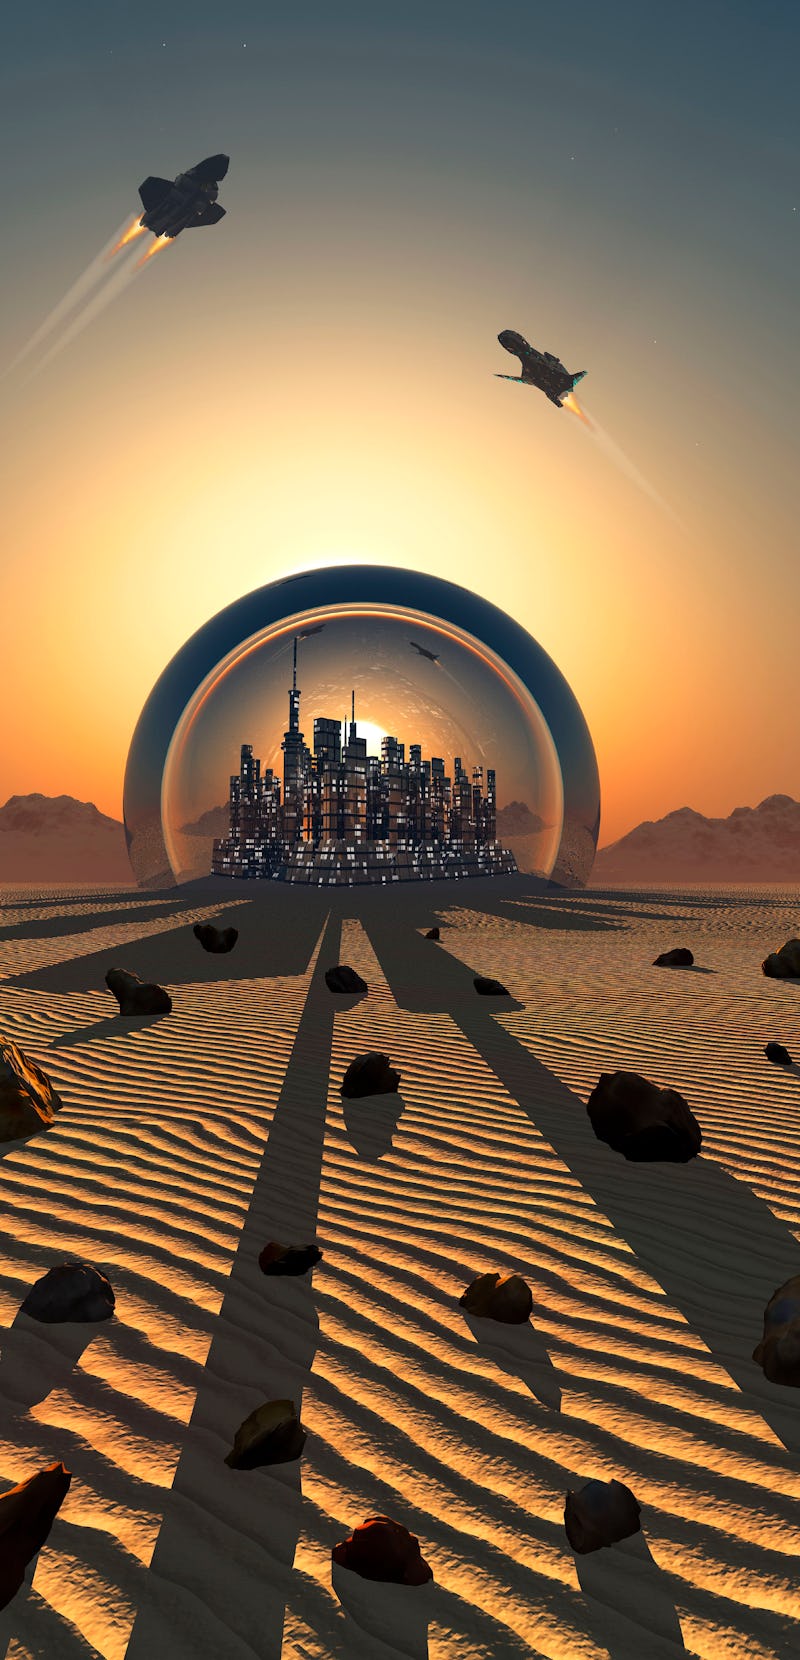 Futuristic City in Protective Sphere on the Surface of the Planet Mars